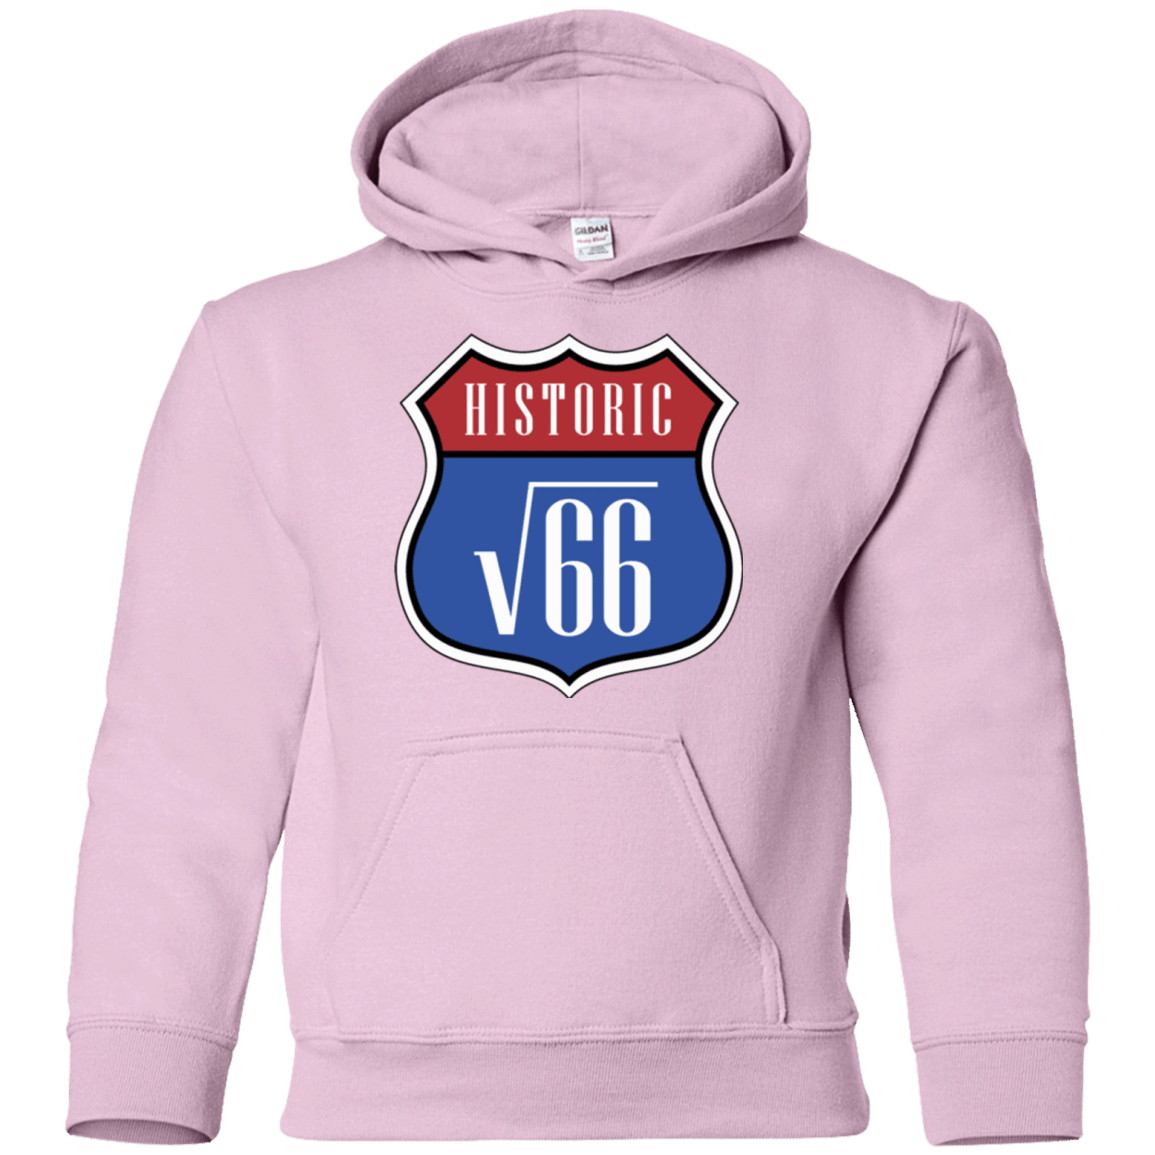 Sweatshirts Light Pink / YS Route v66 Youth Hoodie